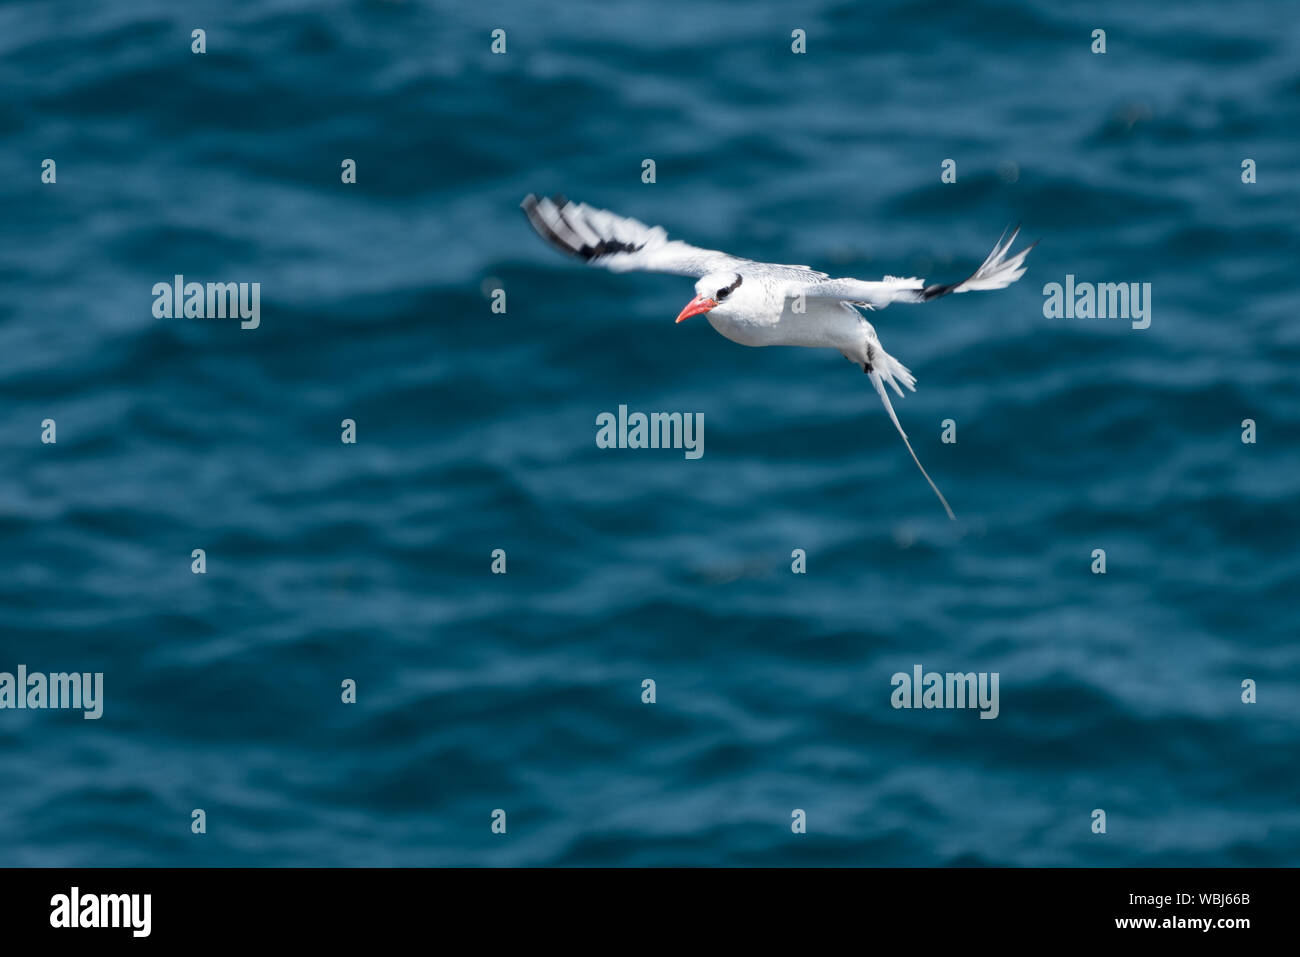 Red-billed Tropicbird (Phaethon aethereus) in flight over the Pacific ocean near South Plaza Island, Galapagos Islands, Ecuador. Stock Photo